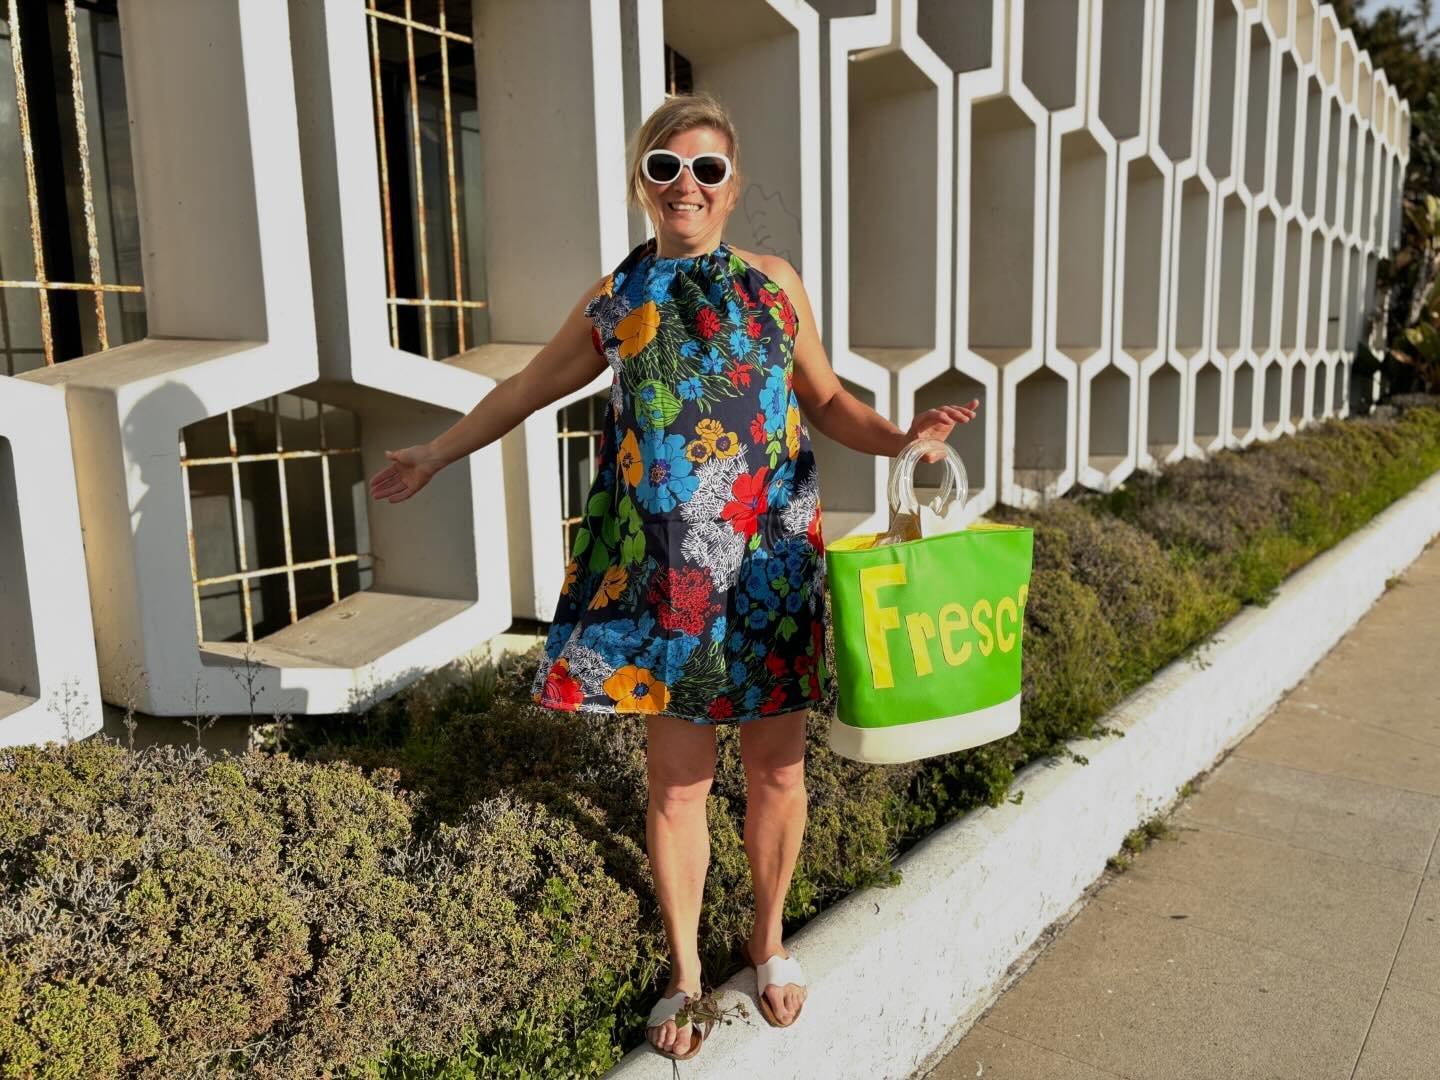 Happy Monday!

Chelle Summer La Palma Dress created with vintage 1971 fabric from an estate sale. The Fresca Take Everywhere Bag is available at www.chellesummer.com.

#mondaymotivation #mondayinspiration #palmspringsstyle #summerstyle #summerdress #